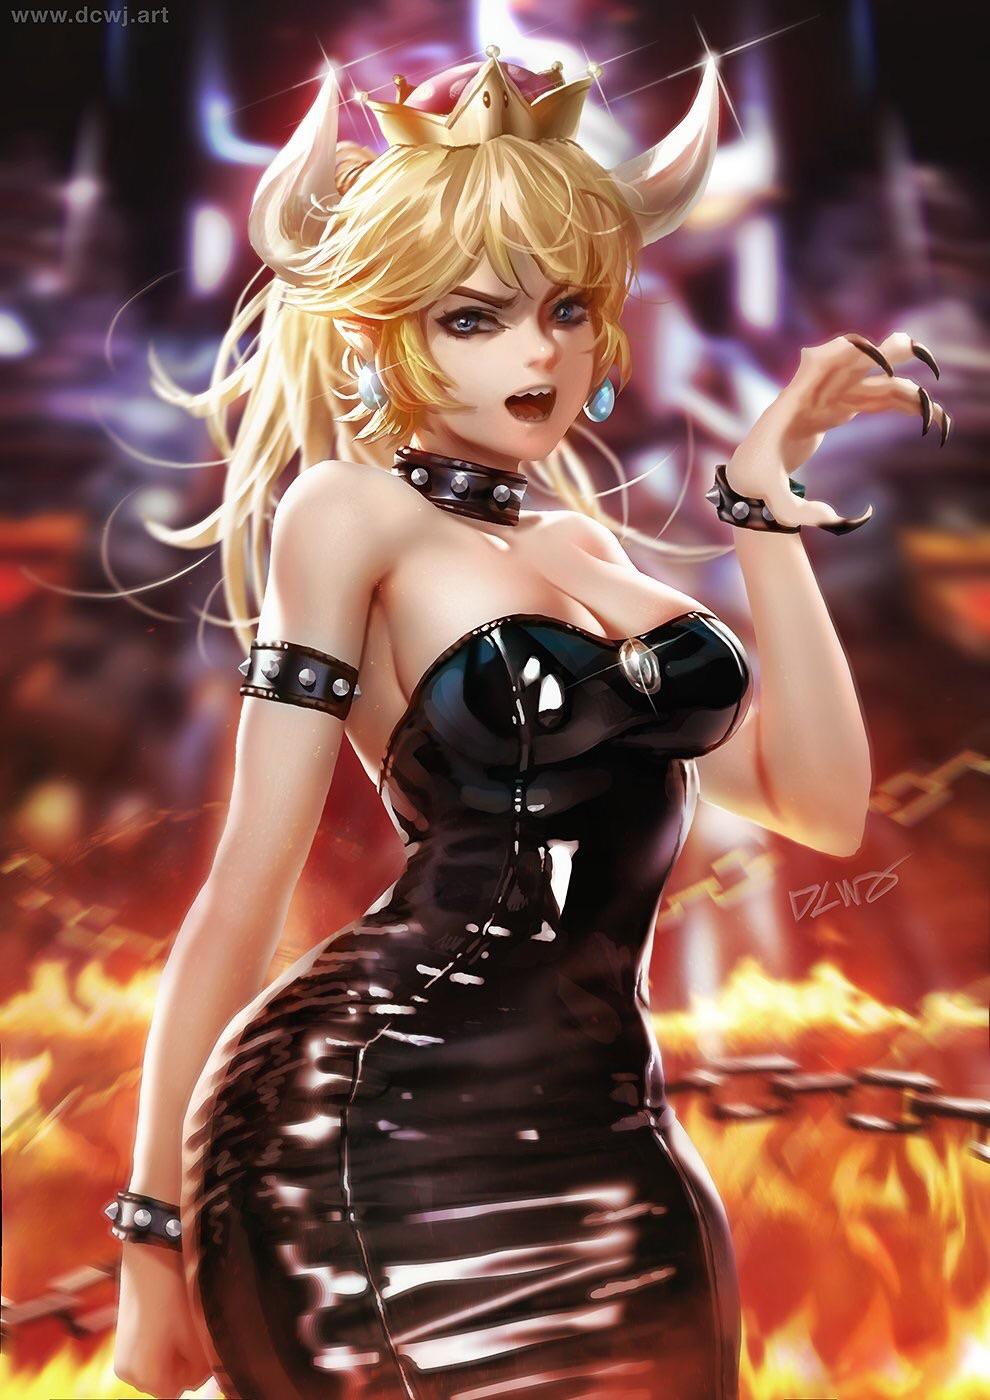 Bowsette Wallpapers